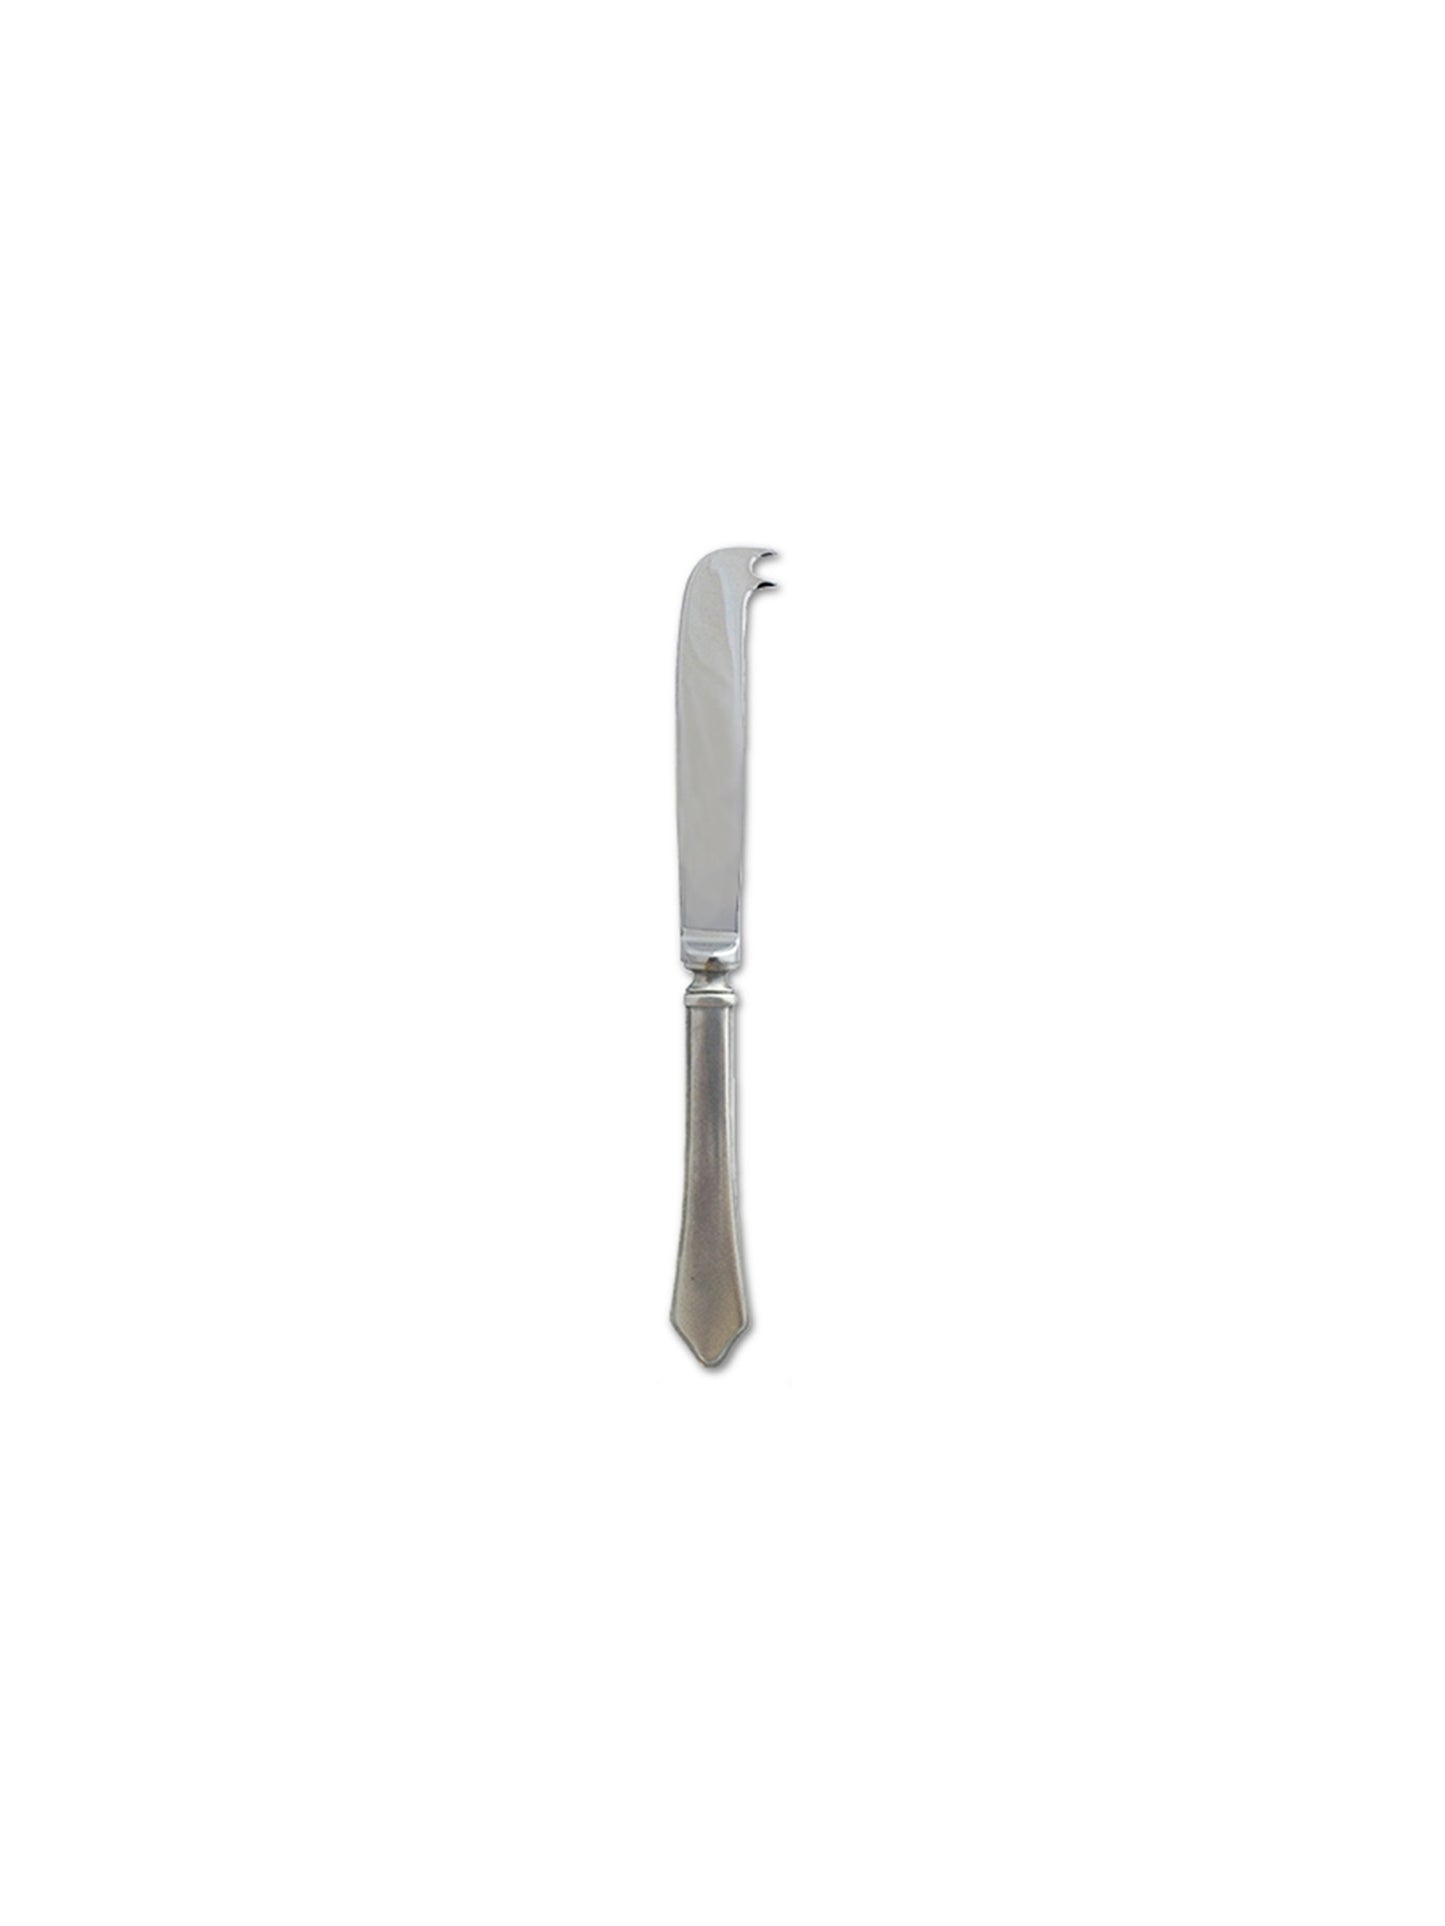 Match Pewter Violetta Cheese Knife